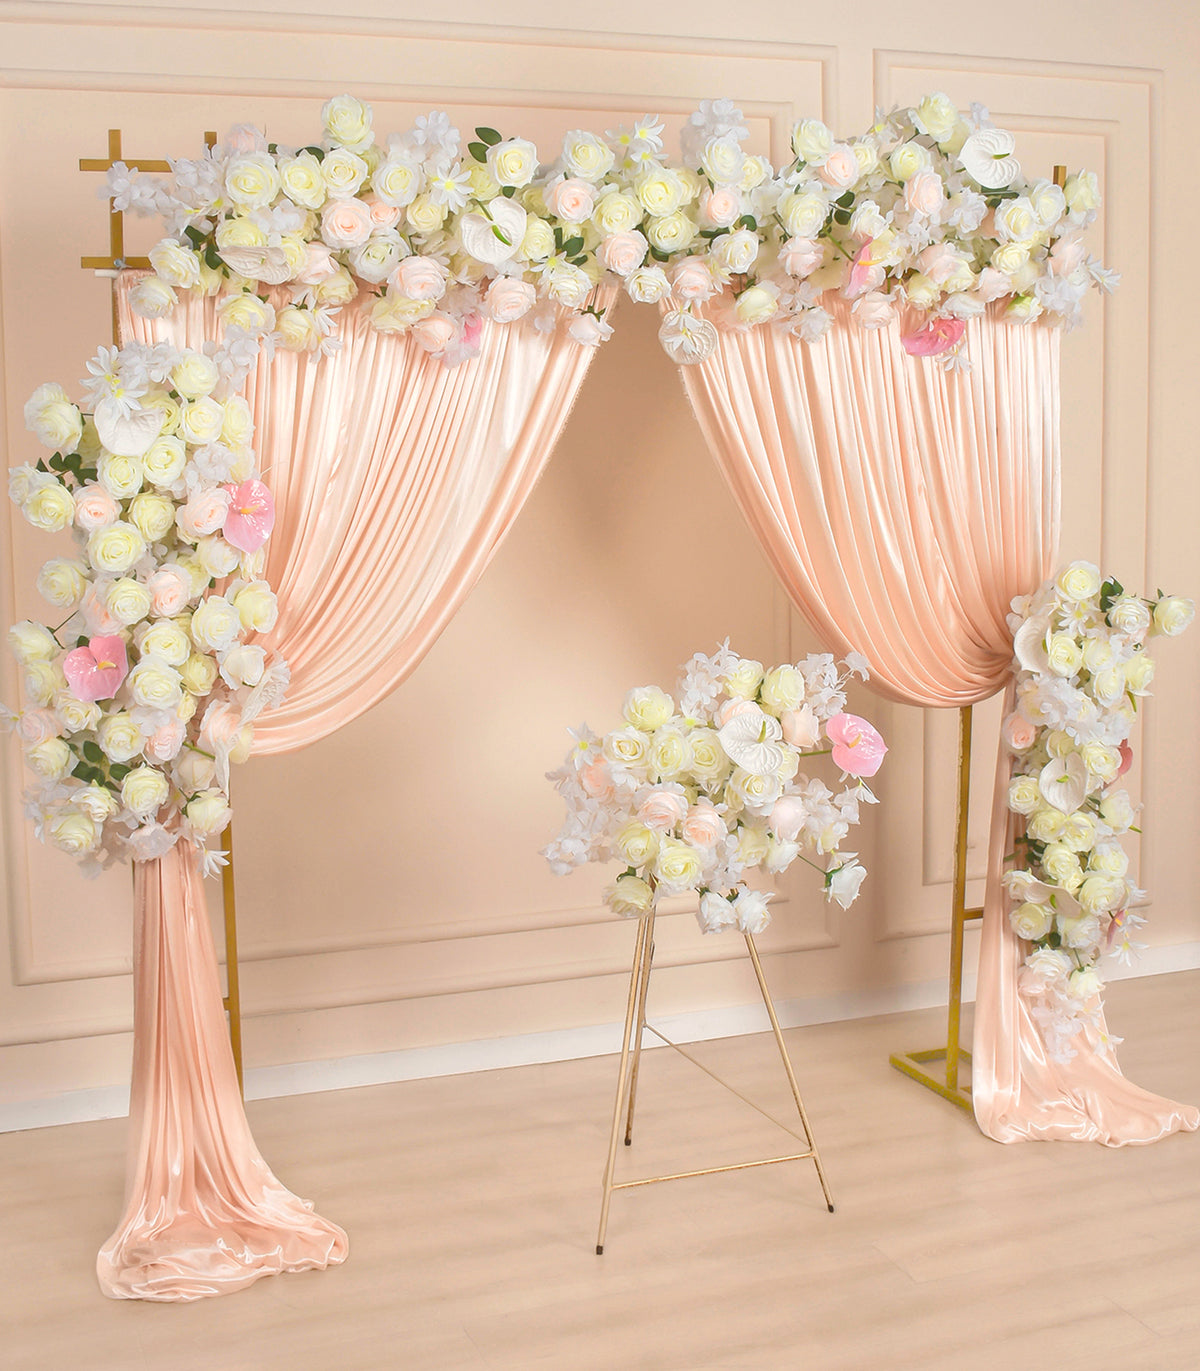 Champagne Pink Anthurium Rose Artificial Flower Wedding Party Birthday Backdrop Decor CH1002